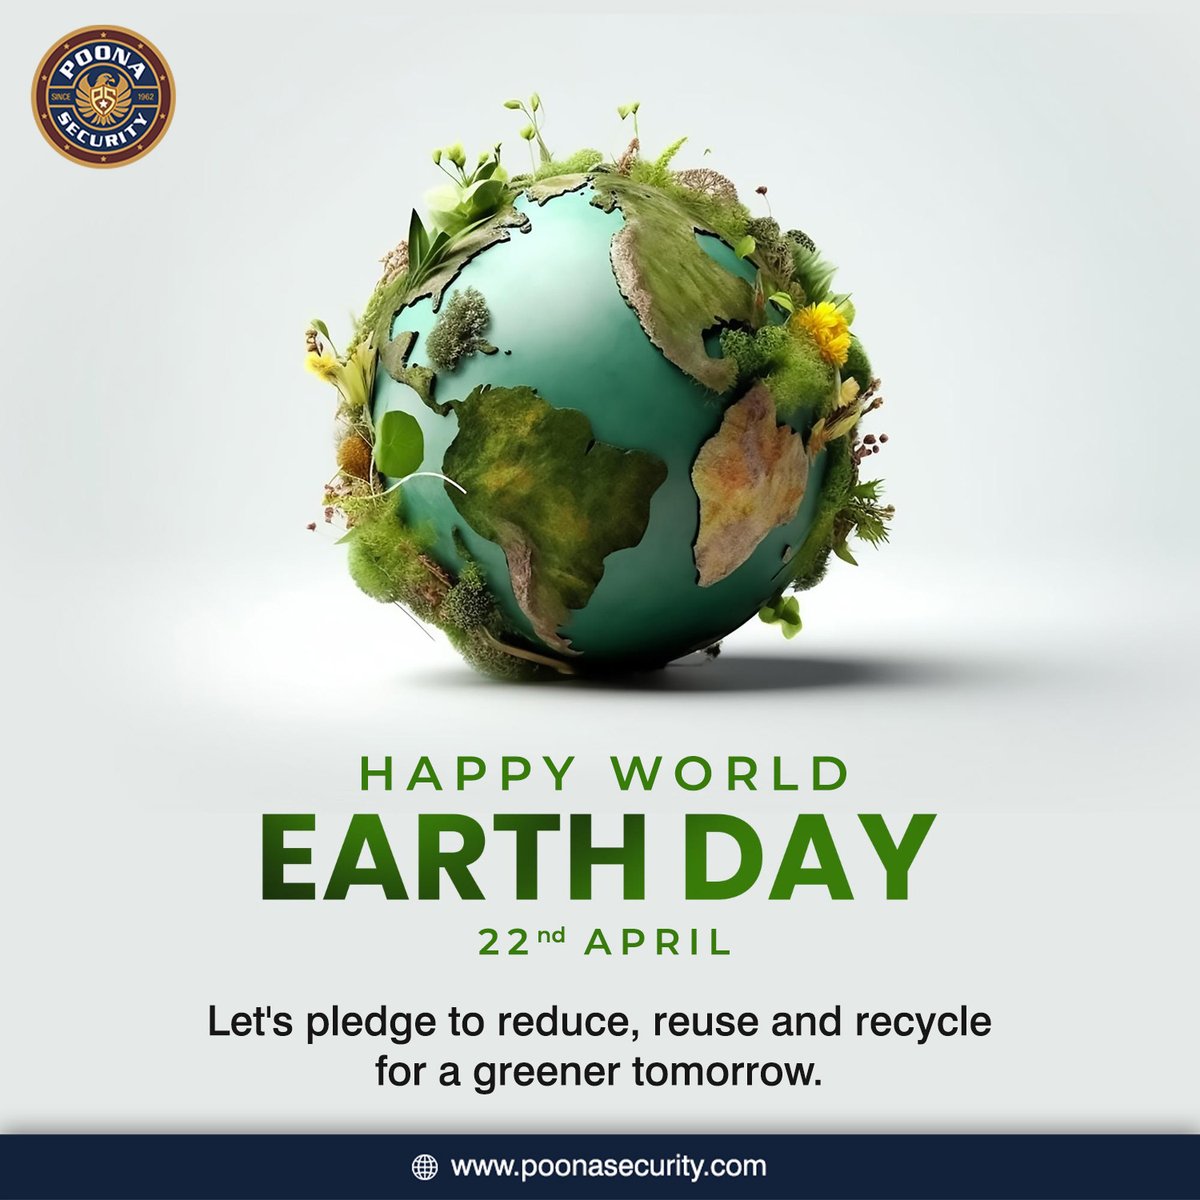 Small actions can make a big difference. Let's commit to #sustainable practices this #WorldEarthDay.

#PoonaSecurity #earthday2024 #EarthDay #earth #nature #climatechange #WorldEarthDay2024 #HappyEarthDay #MotherEarth #MotherNature #ProtectOurPlanet #Planet #SustainableLiving